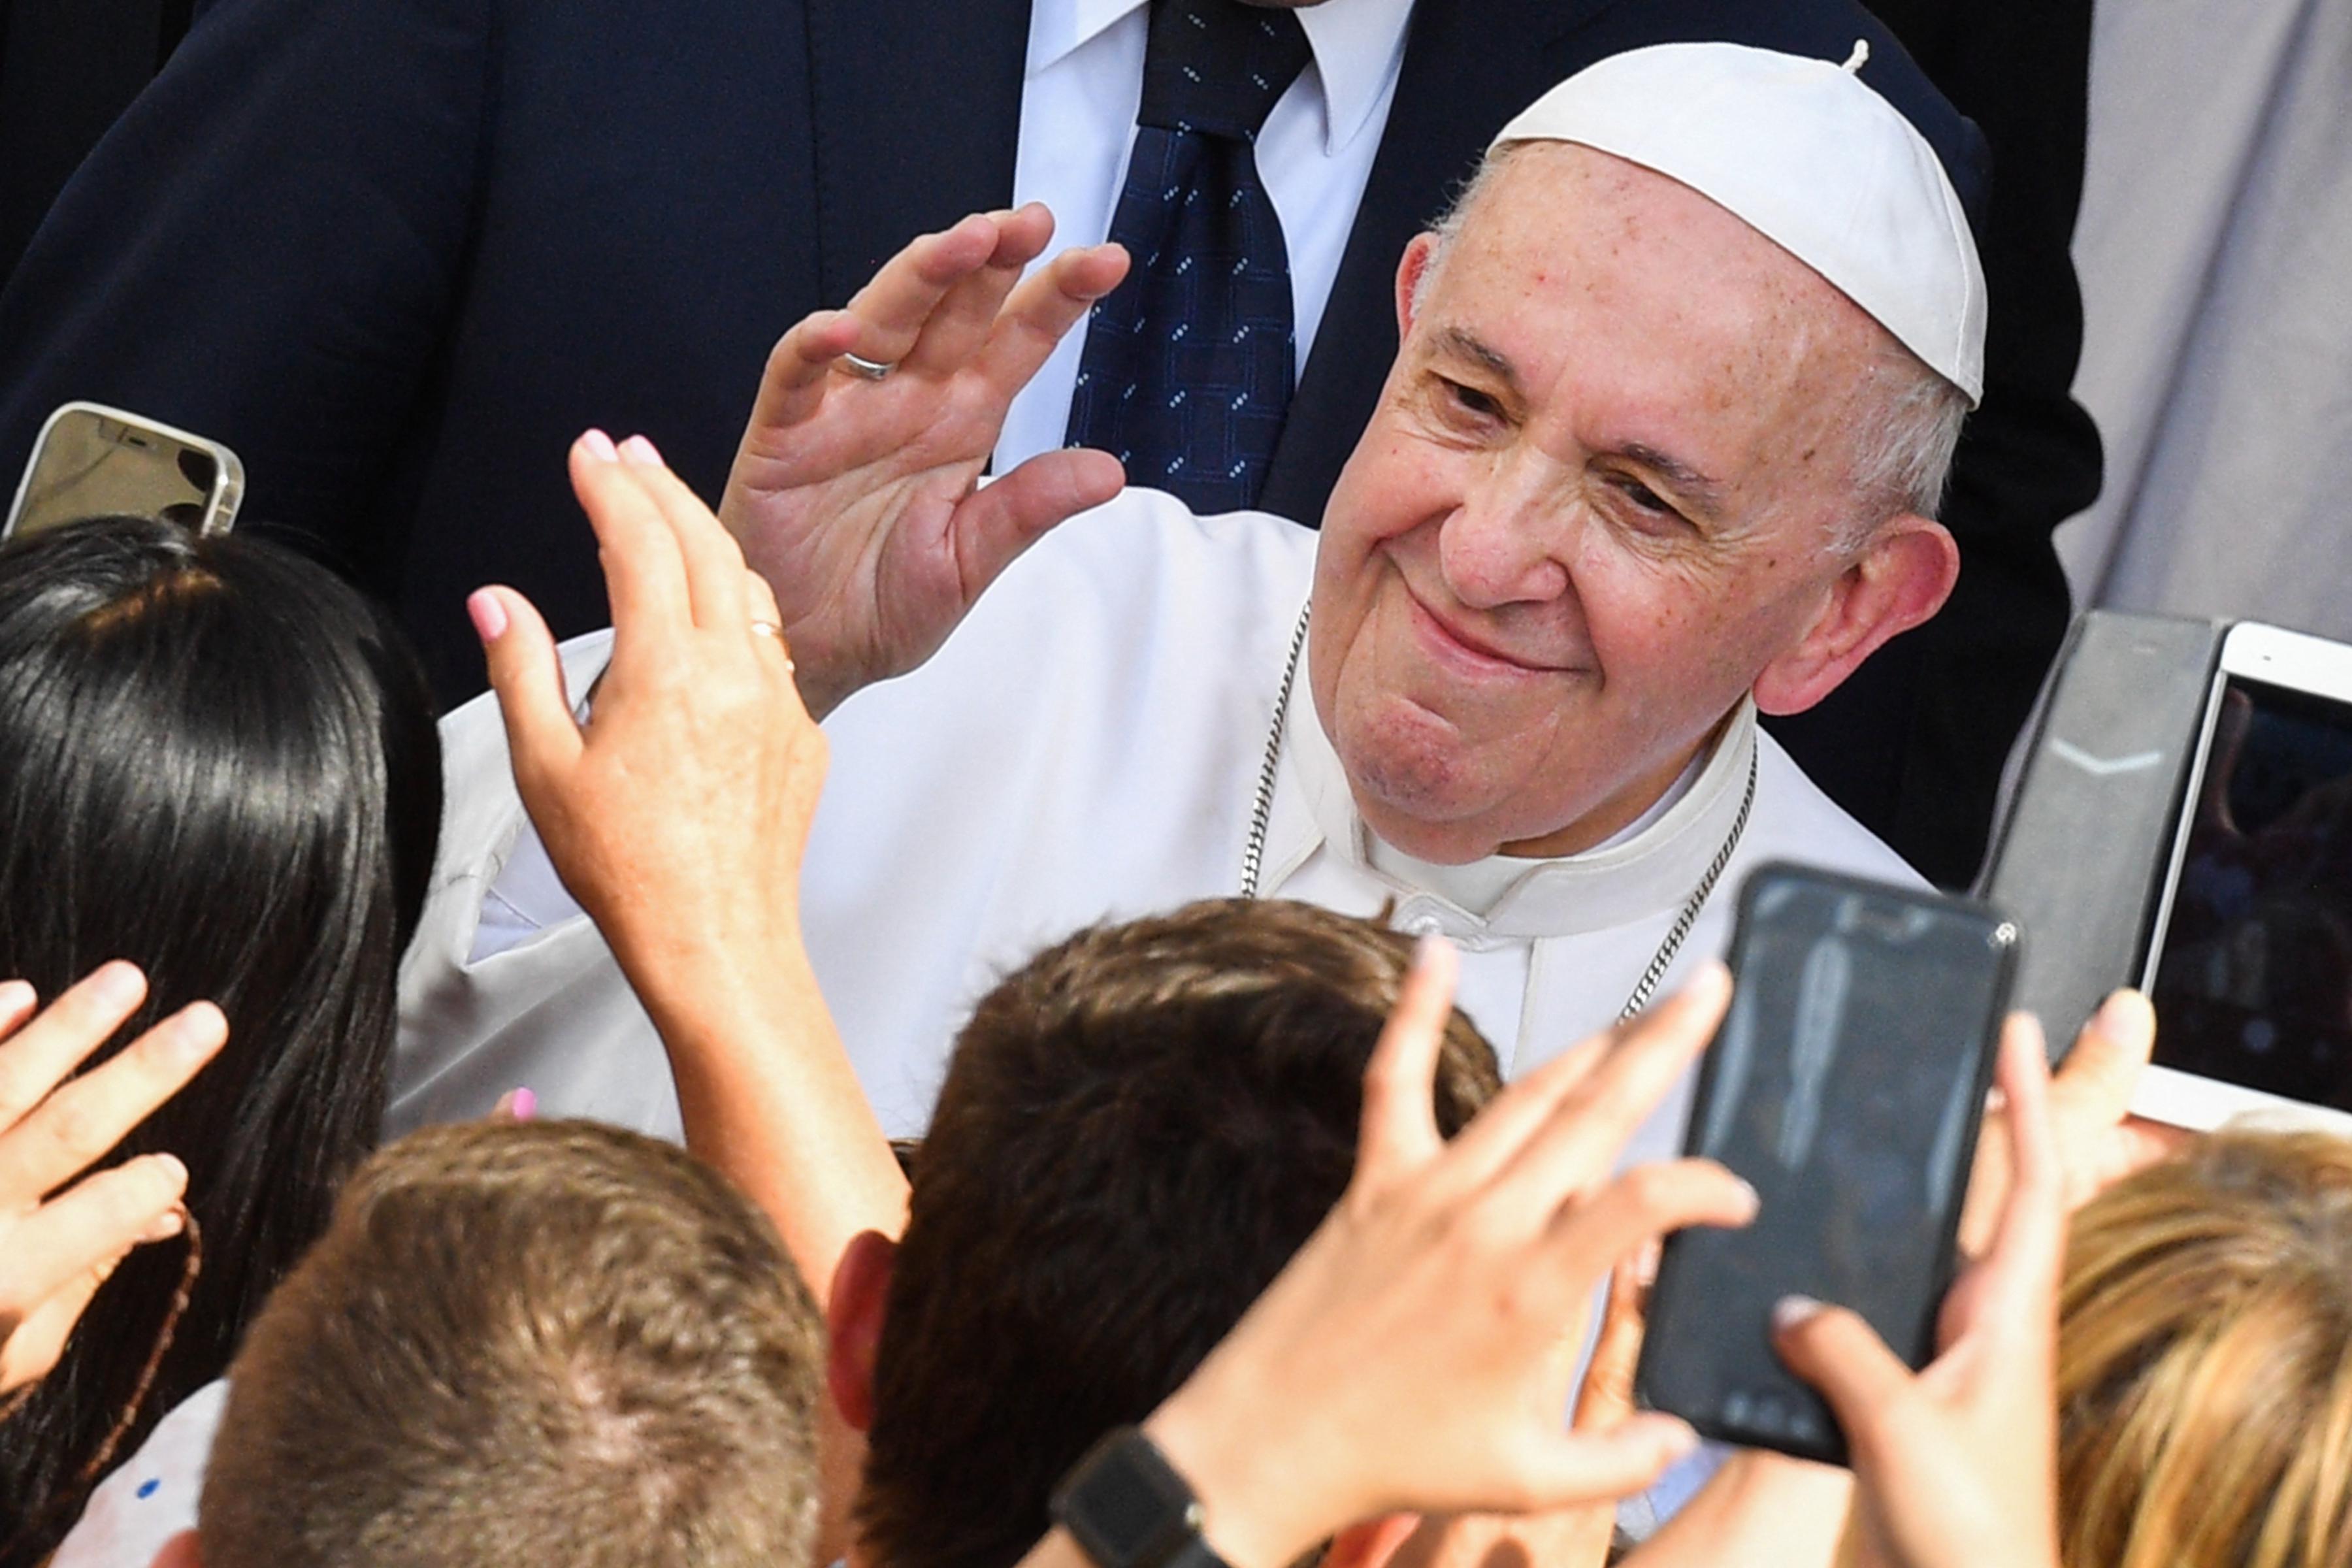 Pope Francis waves as a crowd of people reach for him and take photos.